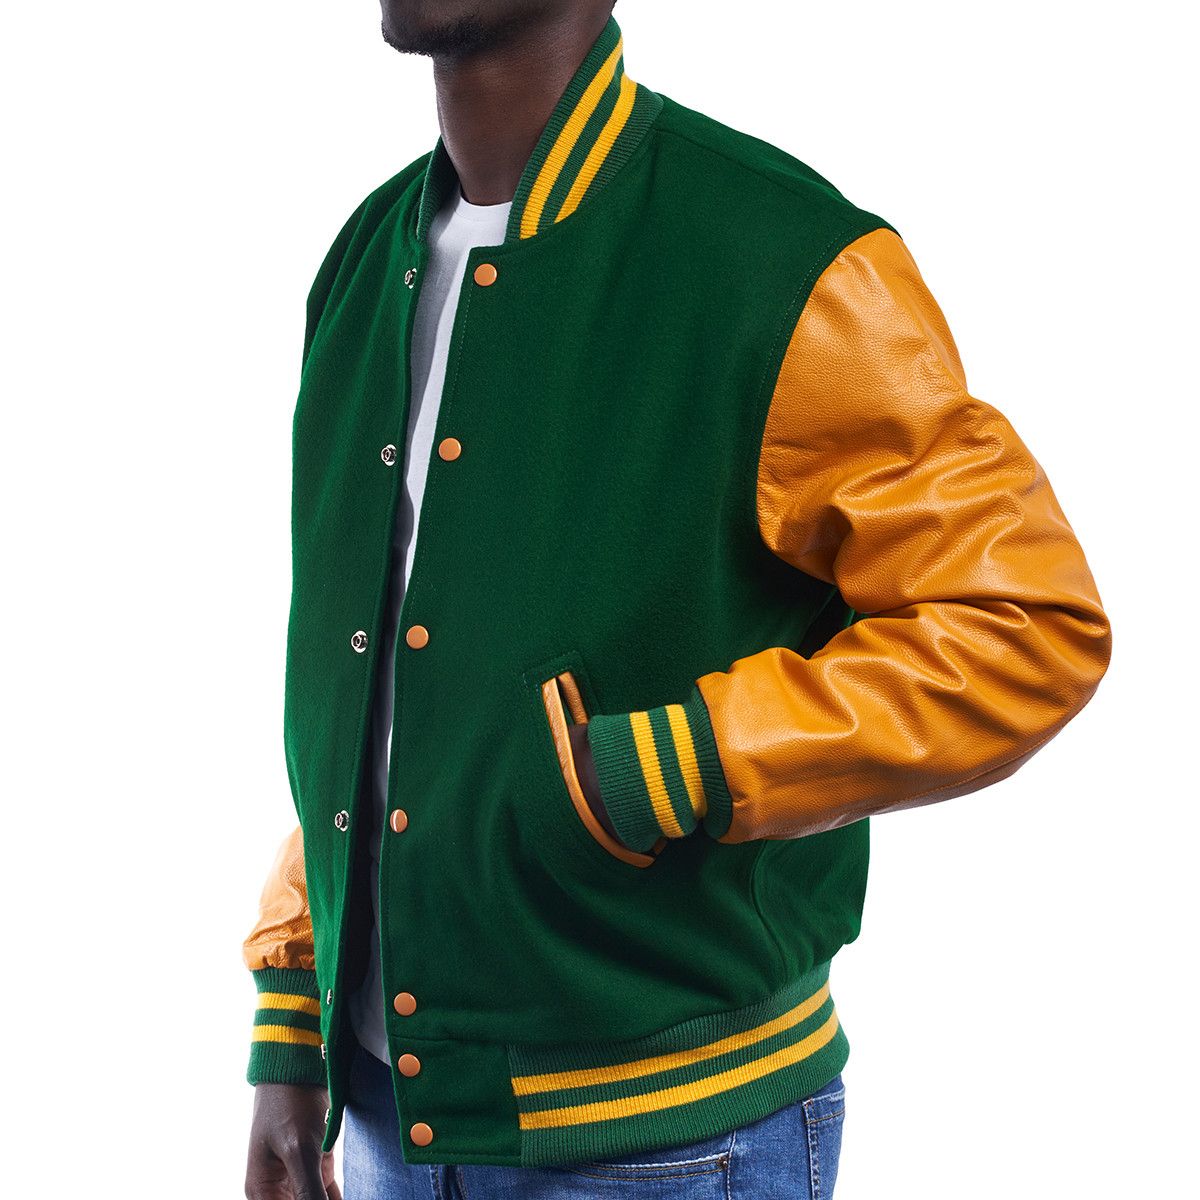 Hunter Green Letterman Jacket with Tan Leather Sleeves